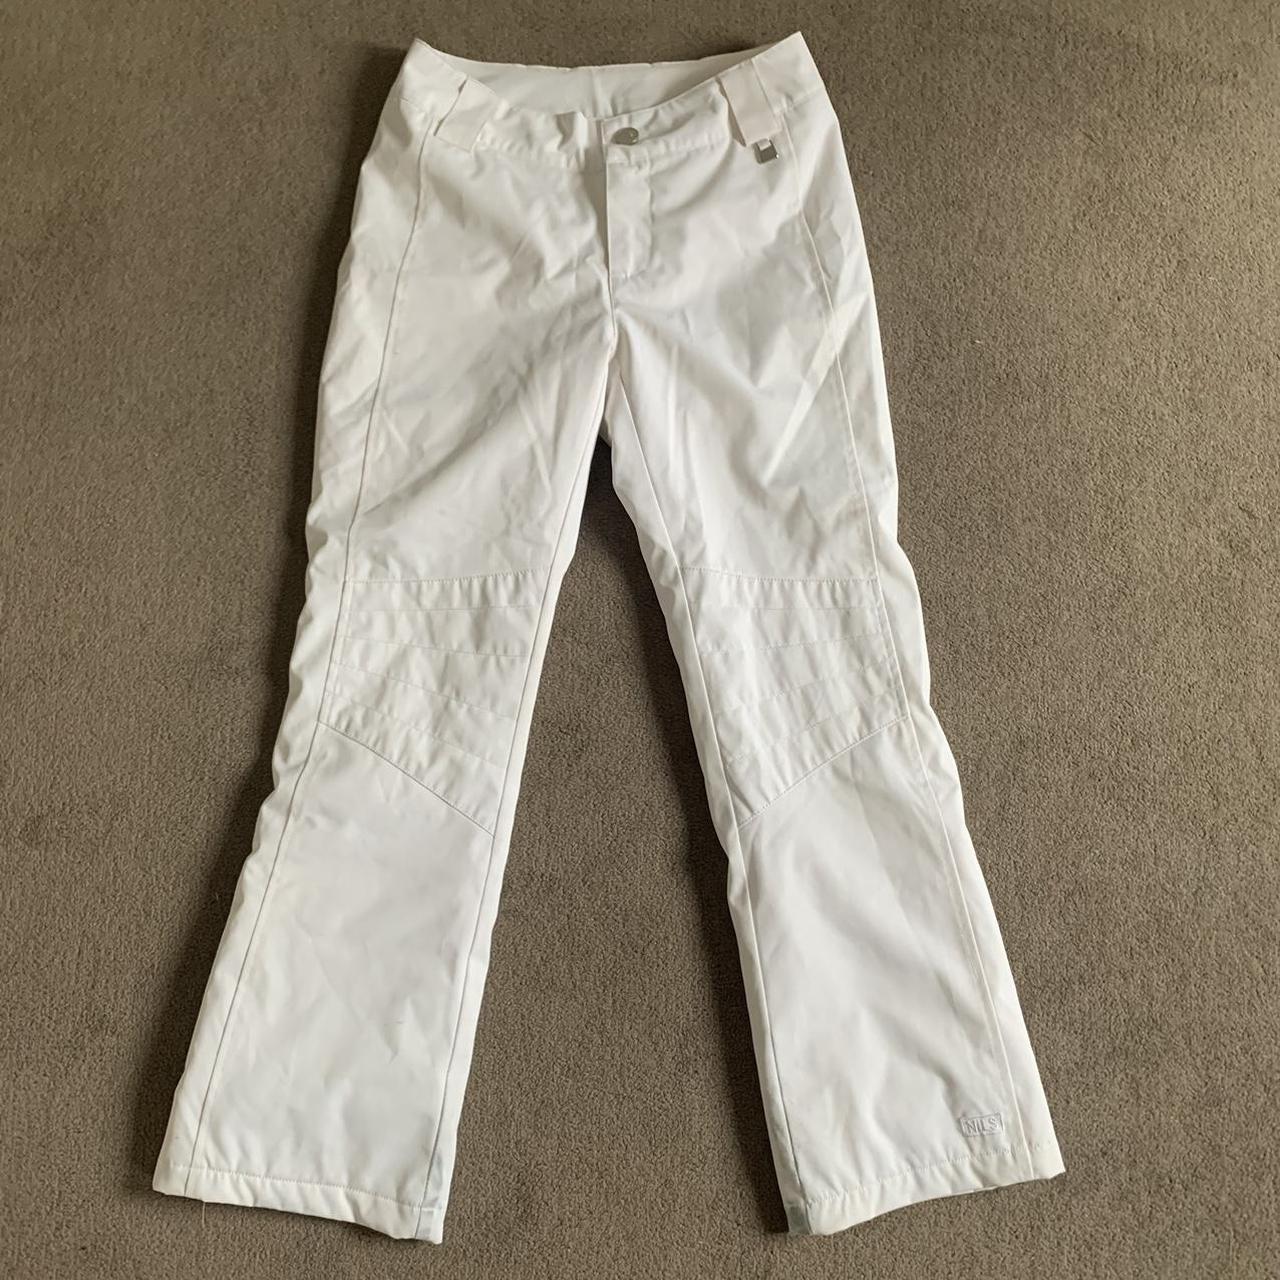 SKI PANTS - good condition / just need a dry clean - - Depop